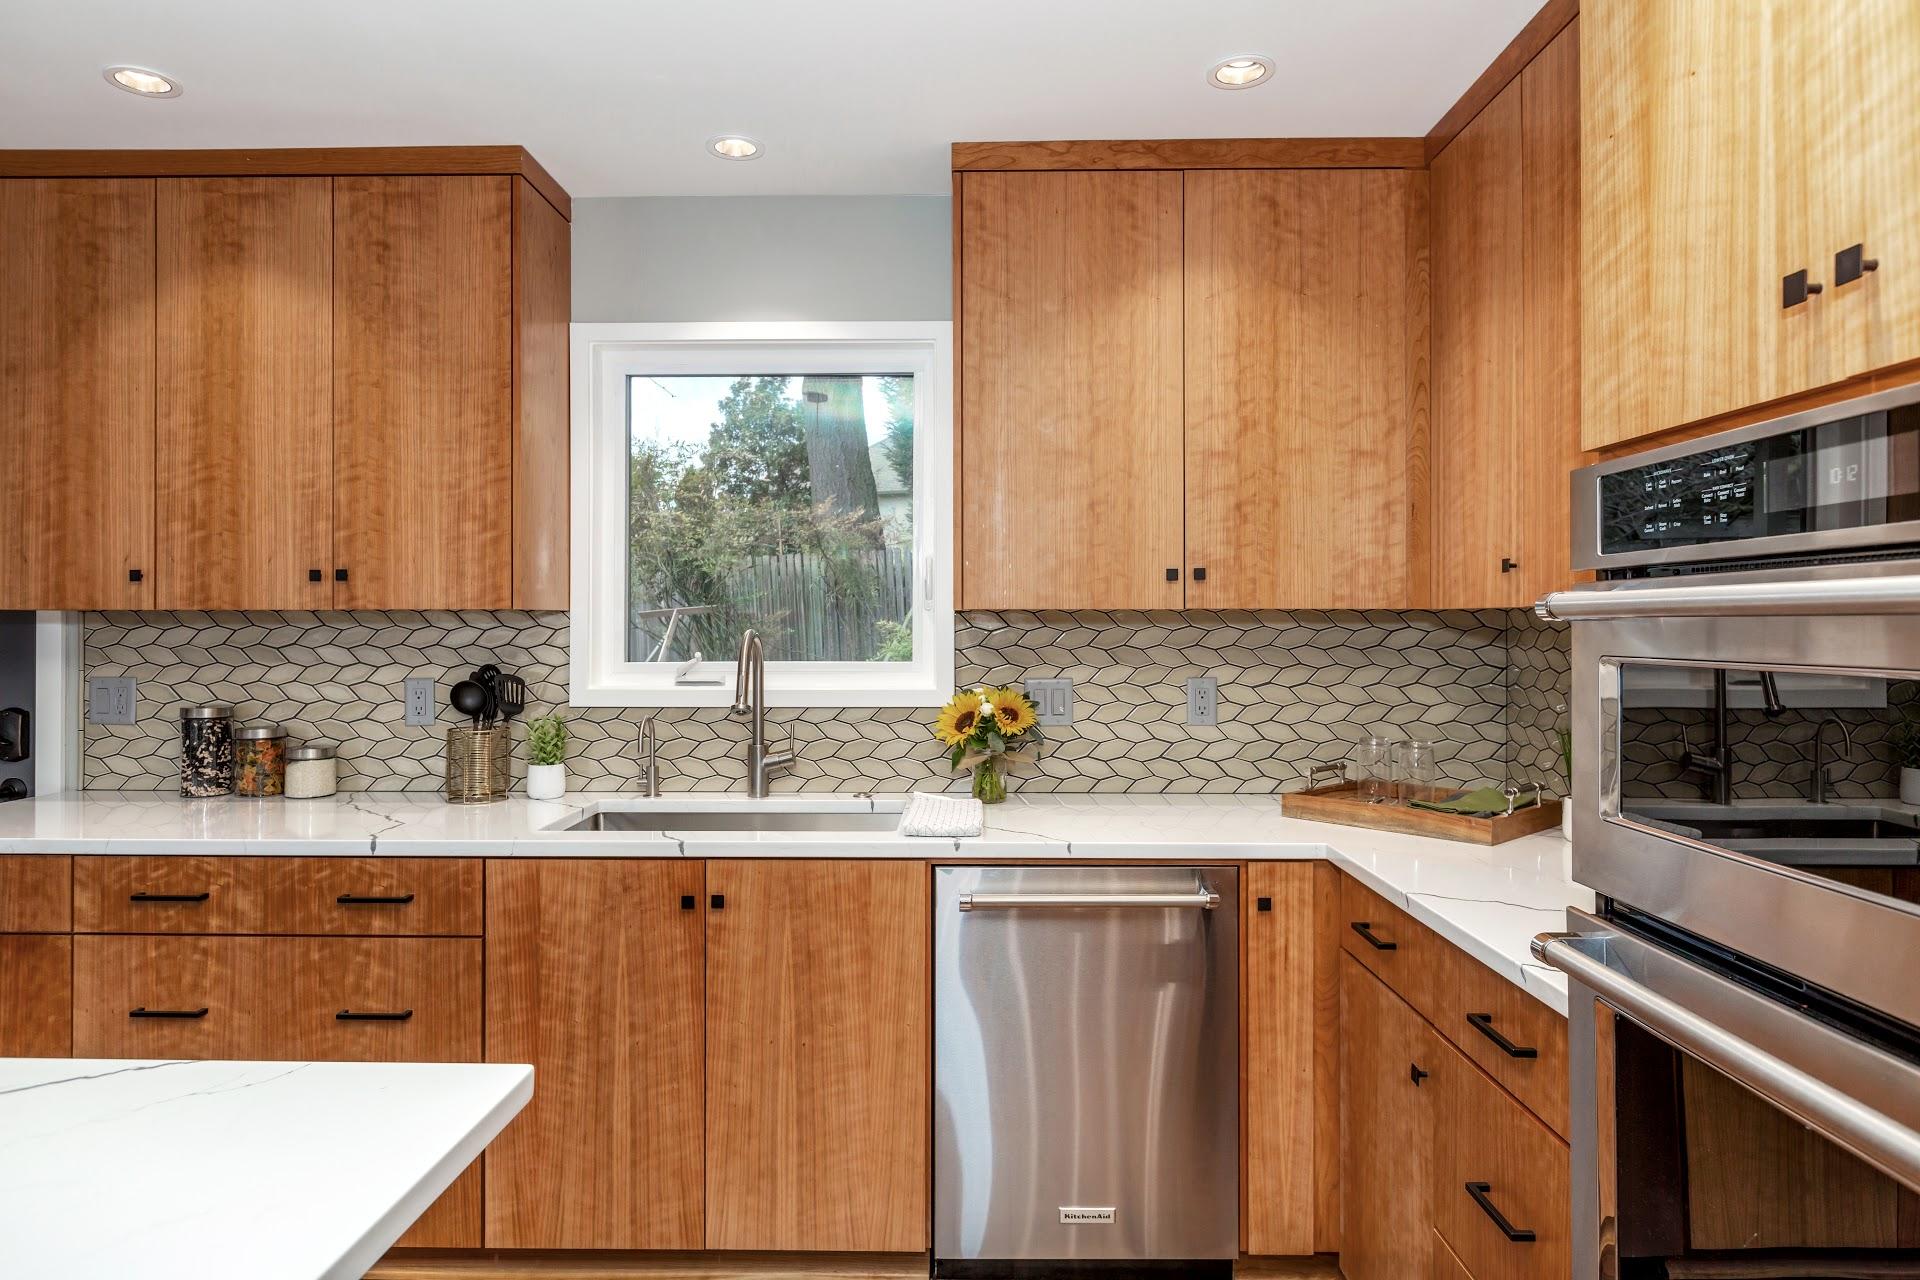 Mid-Century Modern Kitchen with Leaf Tile and Wooden Cabinets